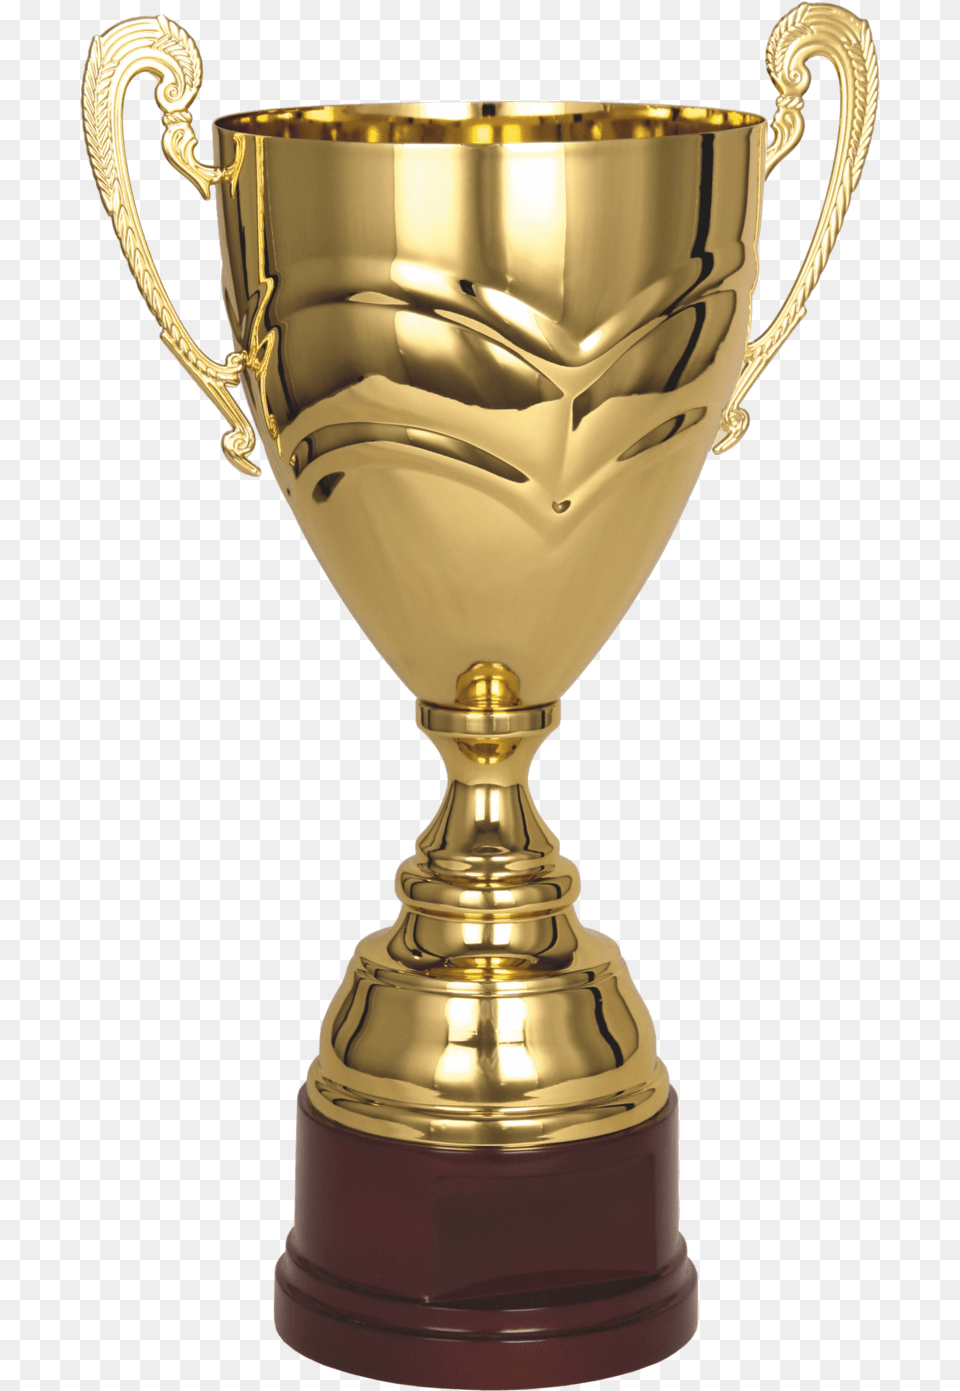 Golden Cup Transparent Background Trophy, Smoke Pipe Png